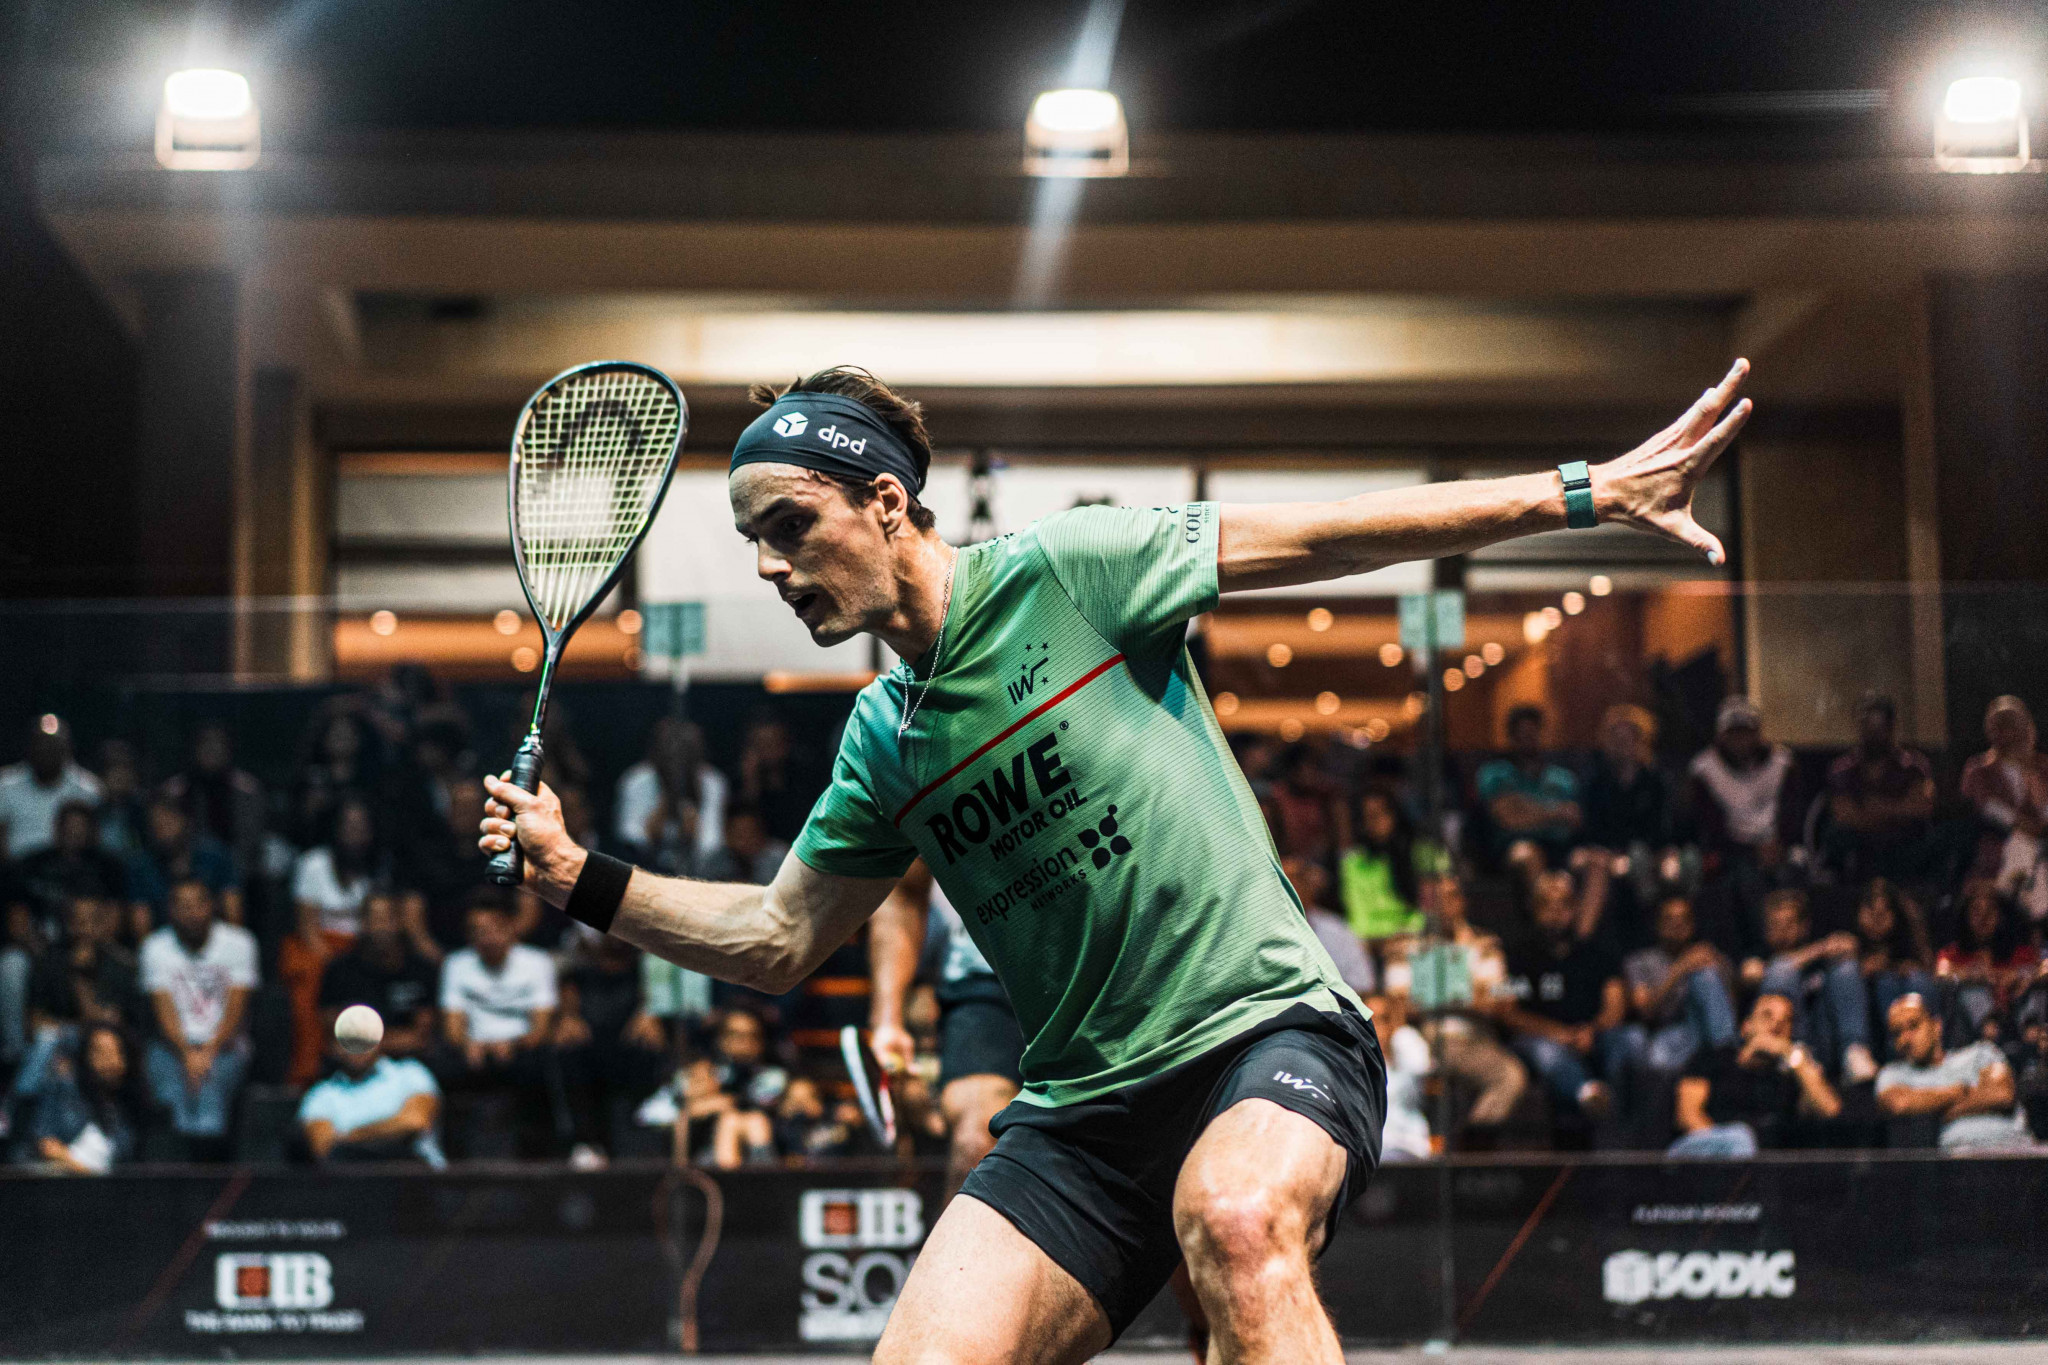 Top seeds Coll and Gohar among winners on opening day of World Squash Championships